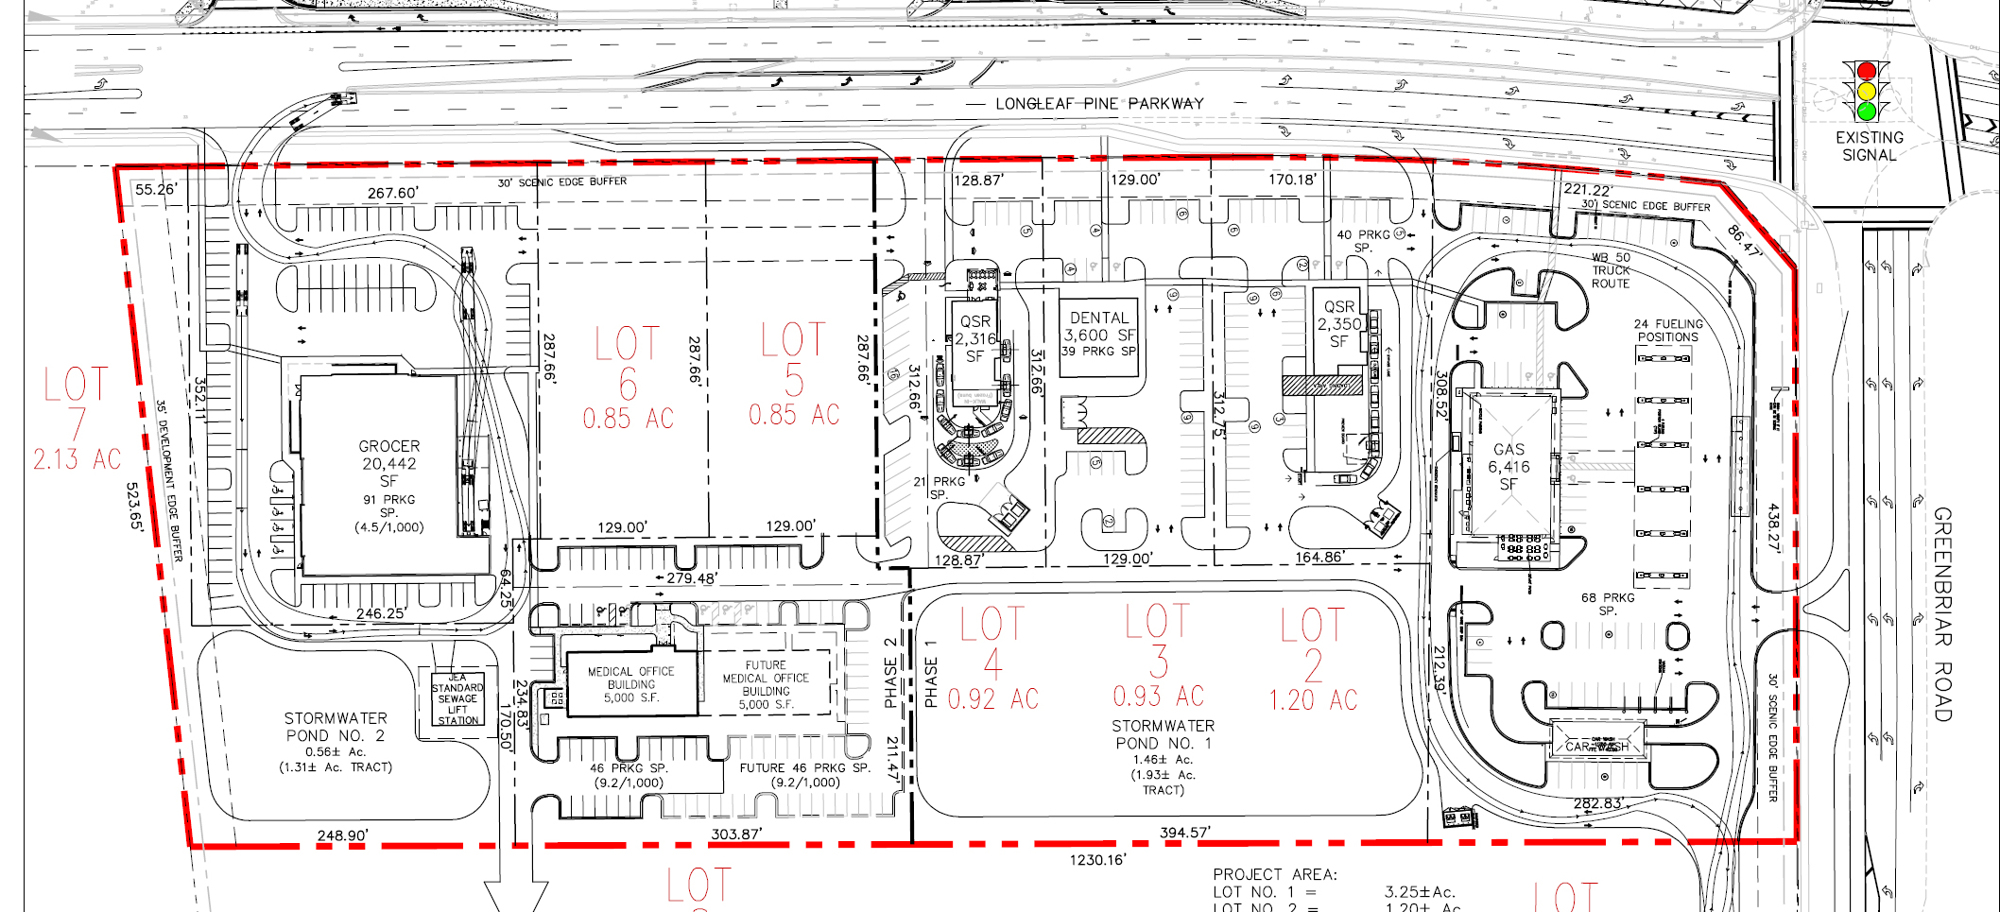 A preliminary site plan for a development  at Longleaf Pine Parkway and Greenbriar Road.